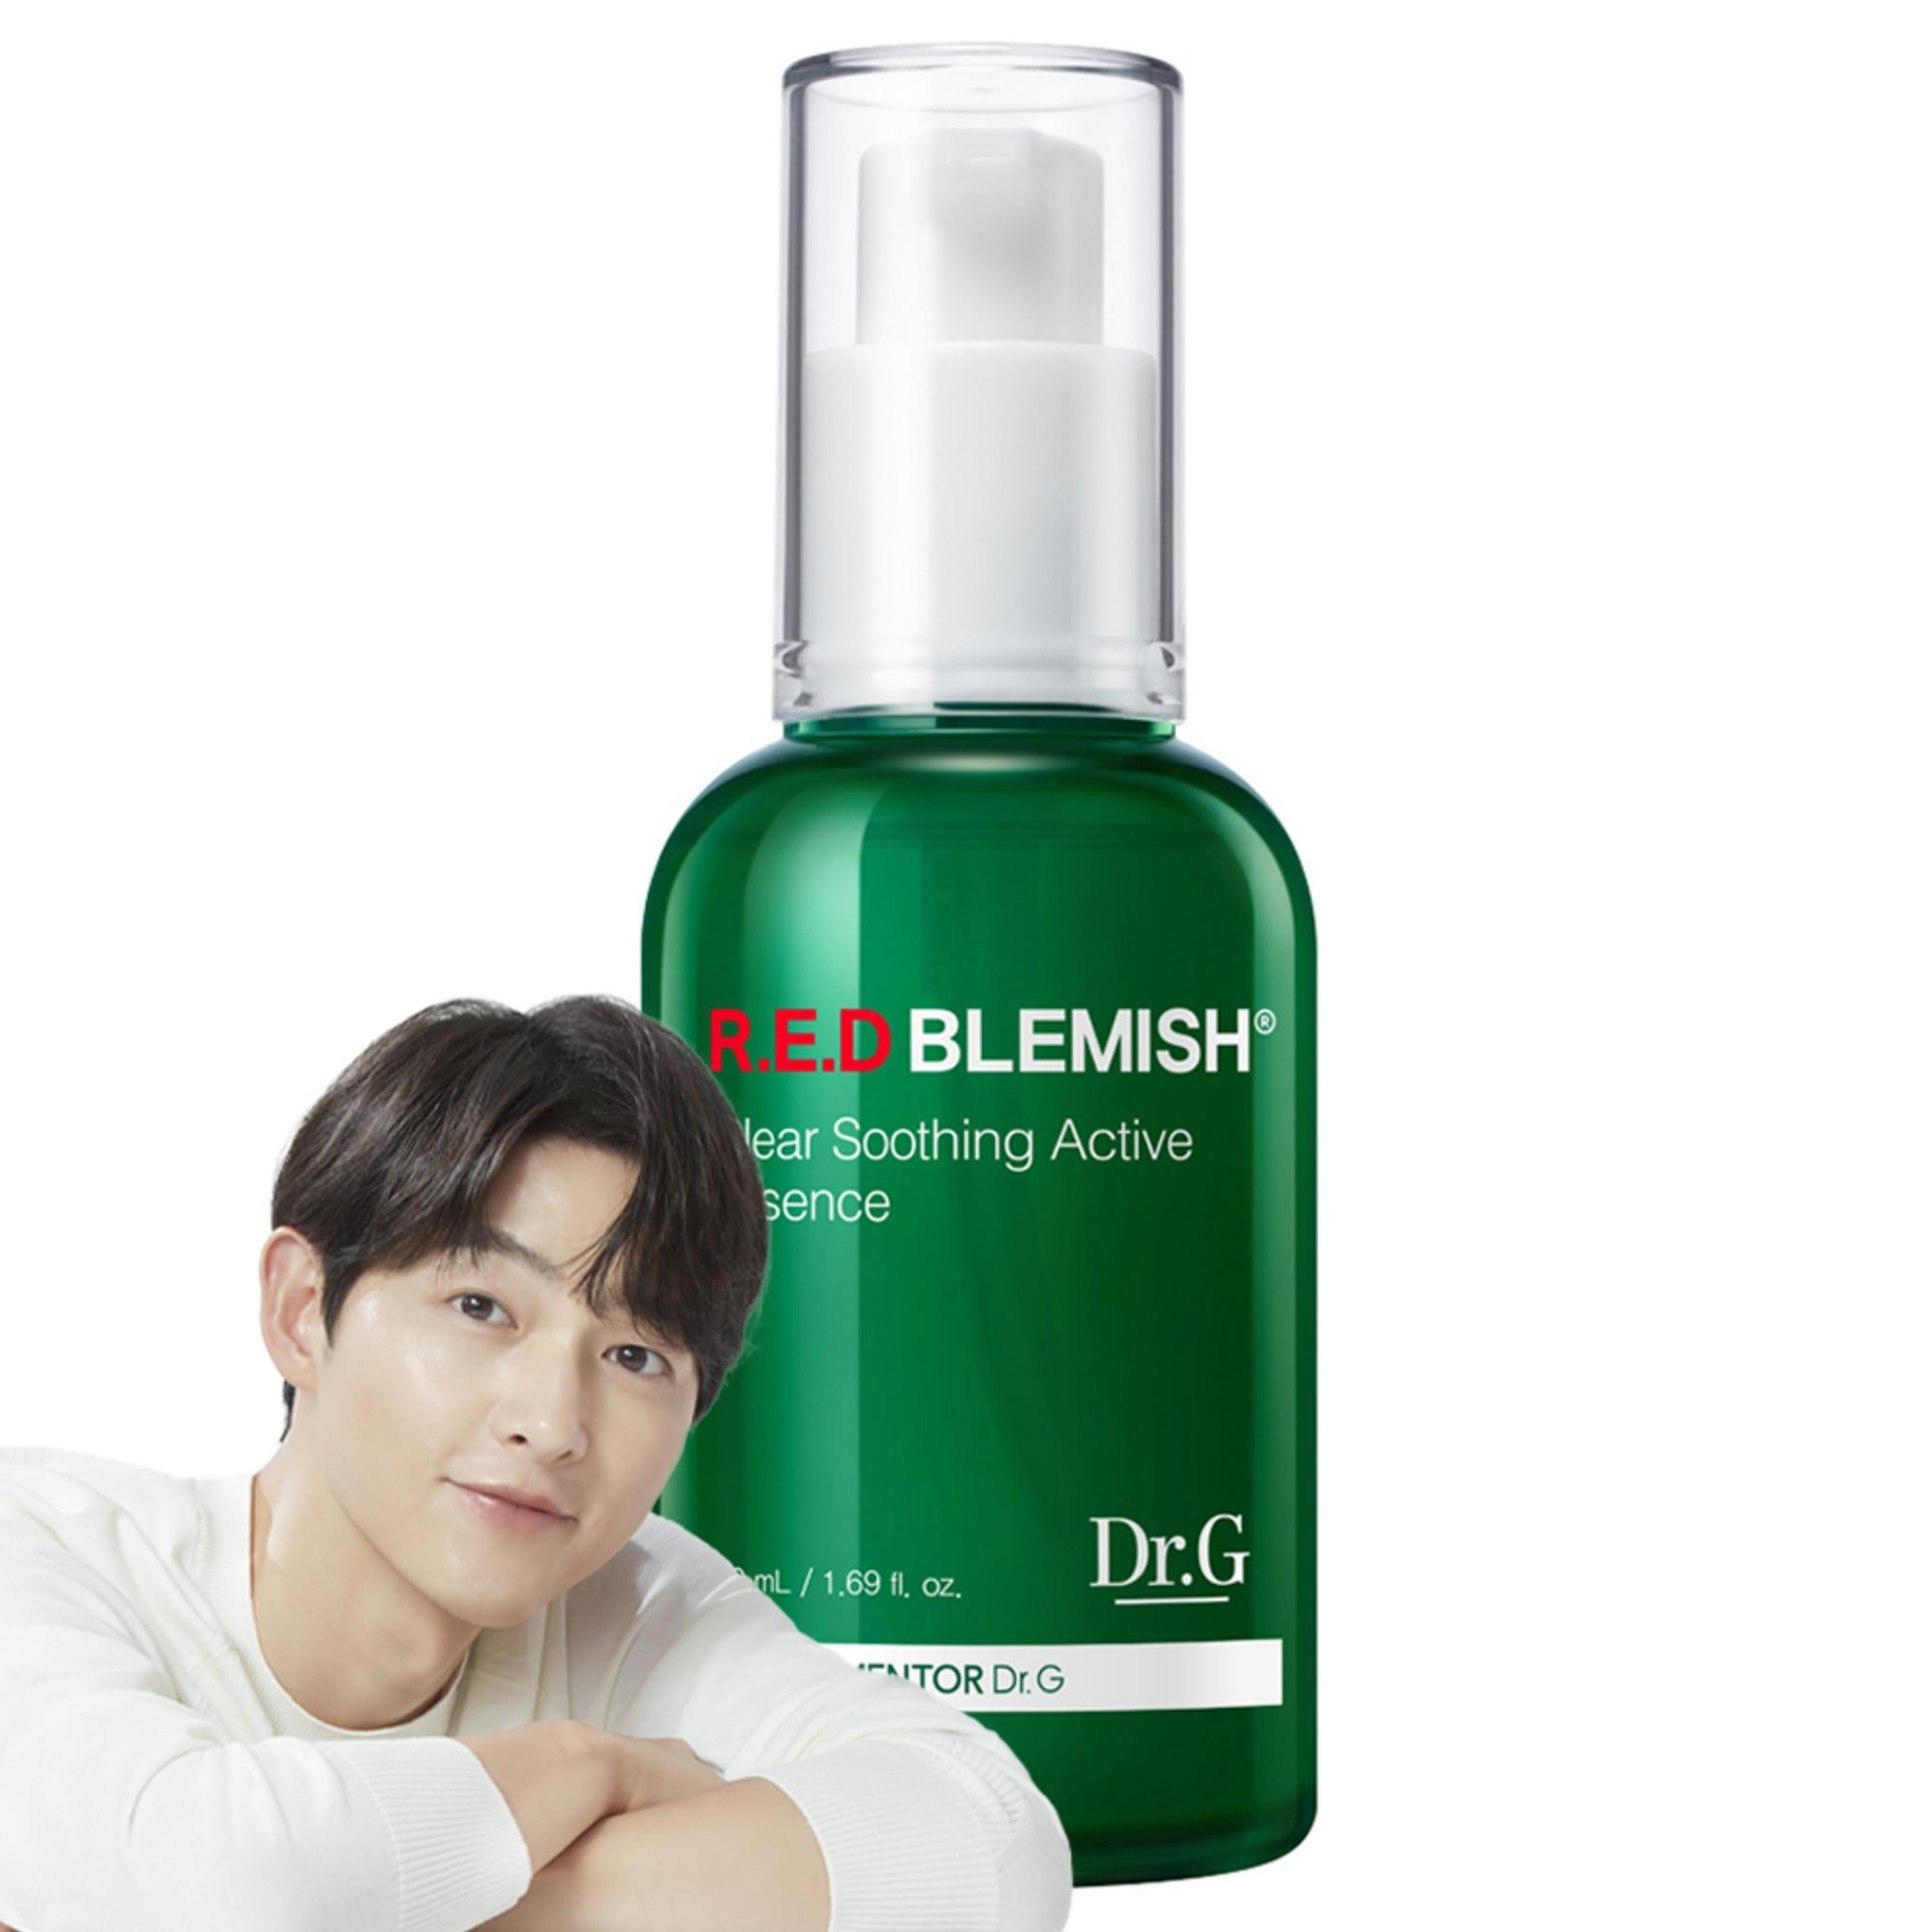 Dr.G Red Blemish Clear Soothing Active Essence